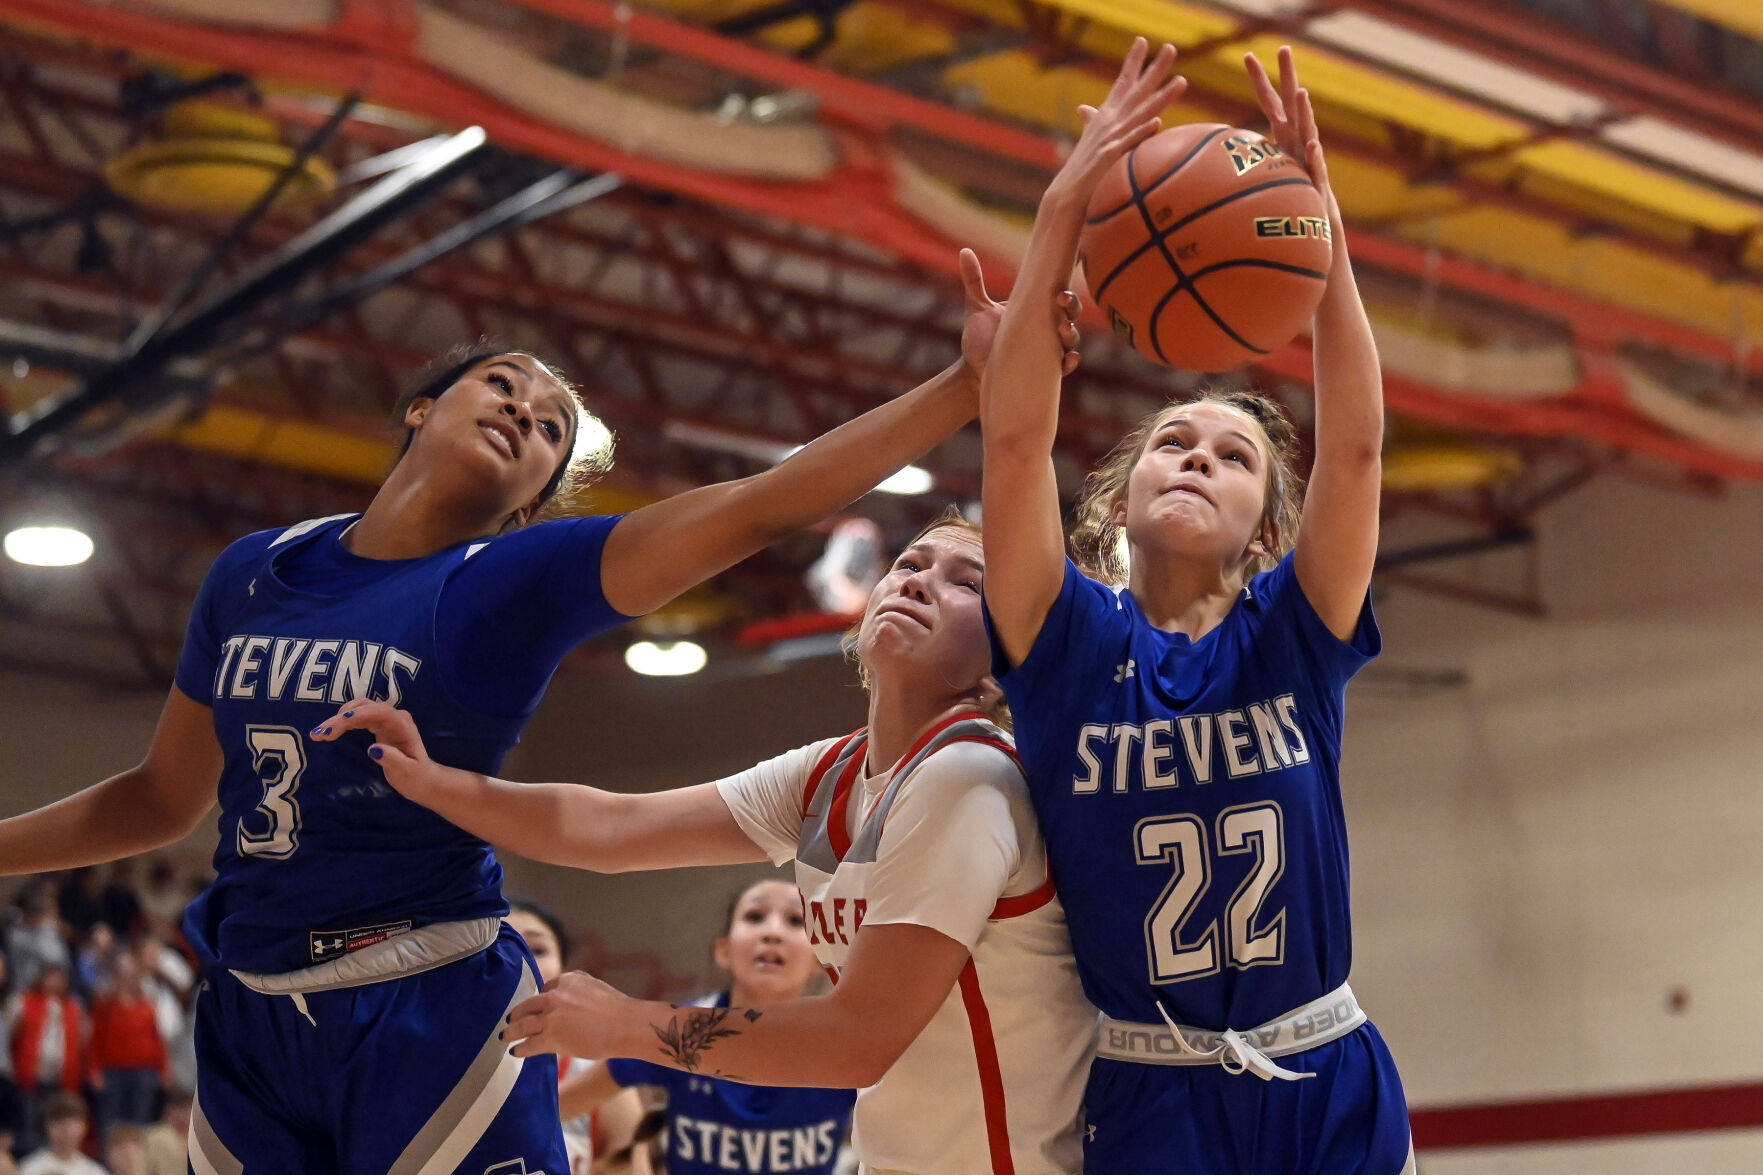 High School Girls Basketball: Rapid City Stevens and Sioux Falls Roosevelt secure victories